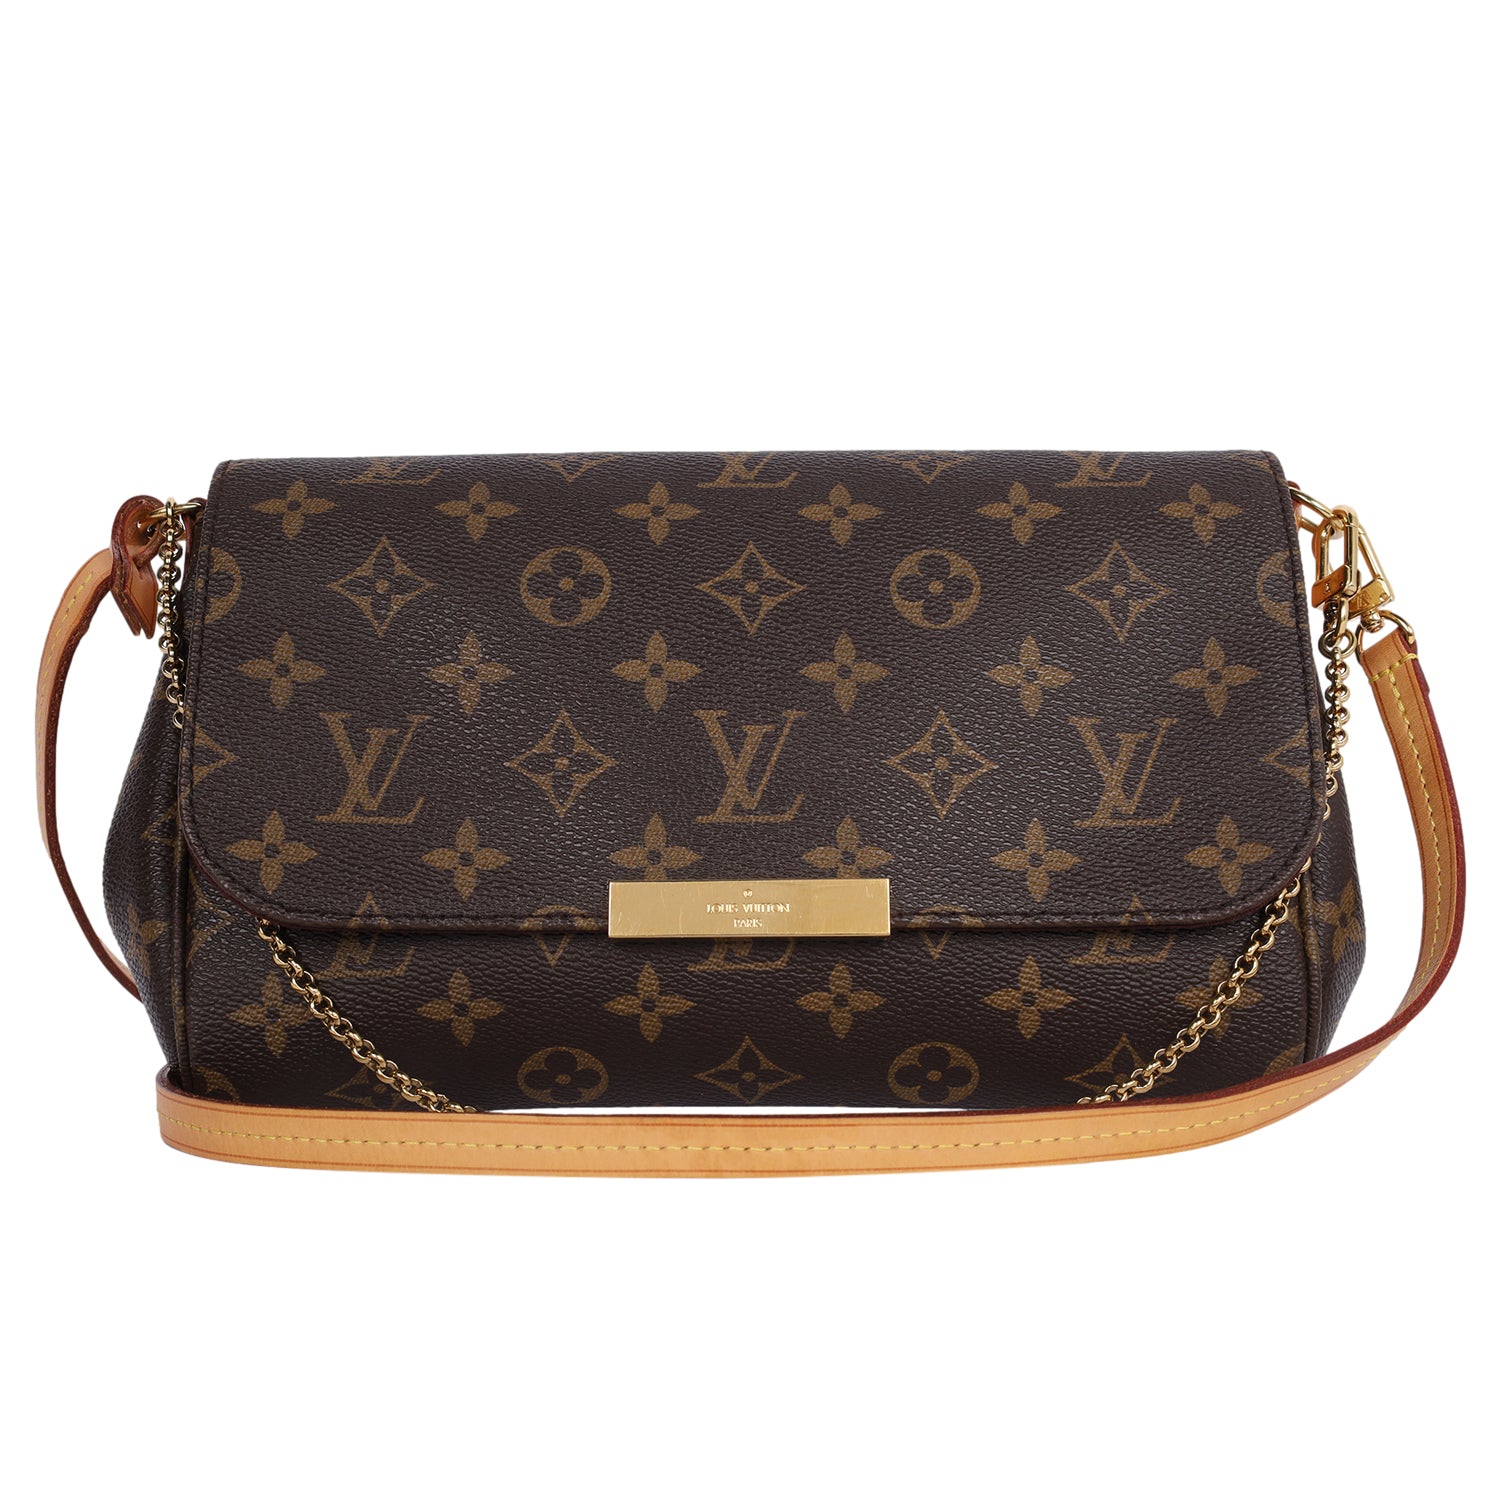 Perfect Louis Vuitton bags for every day